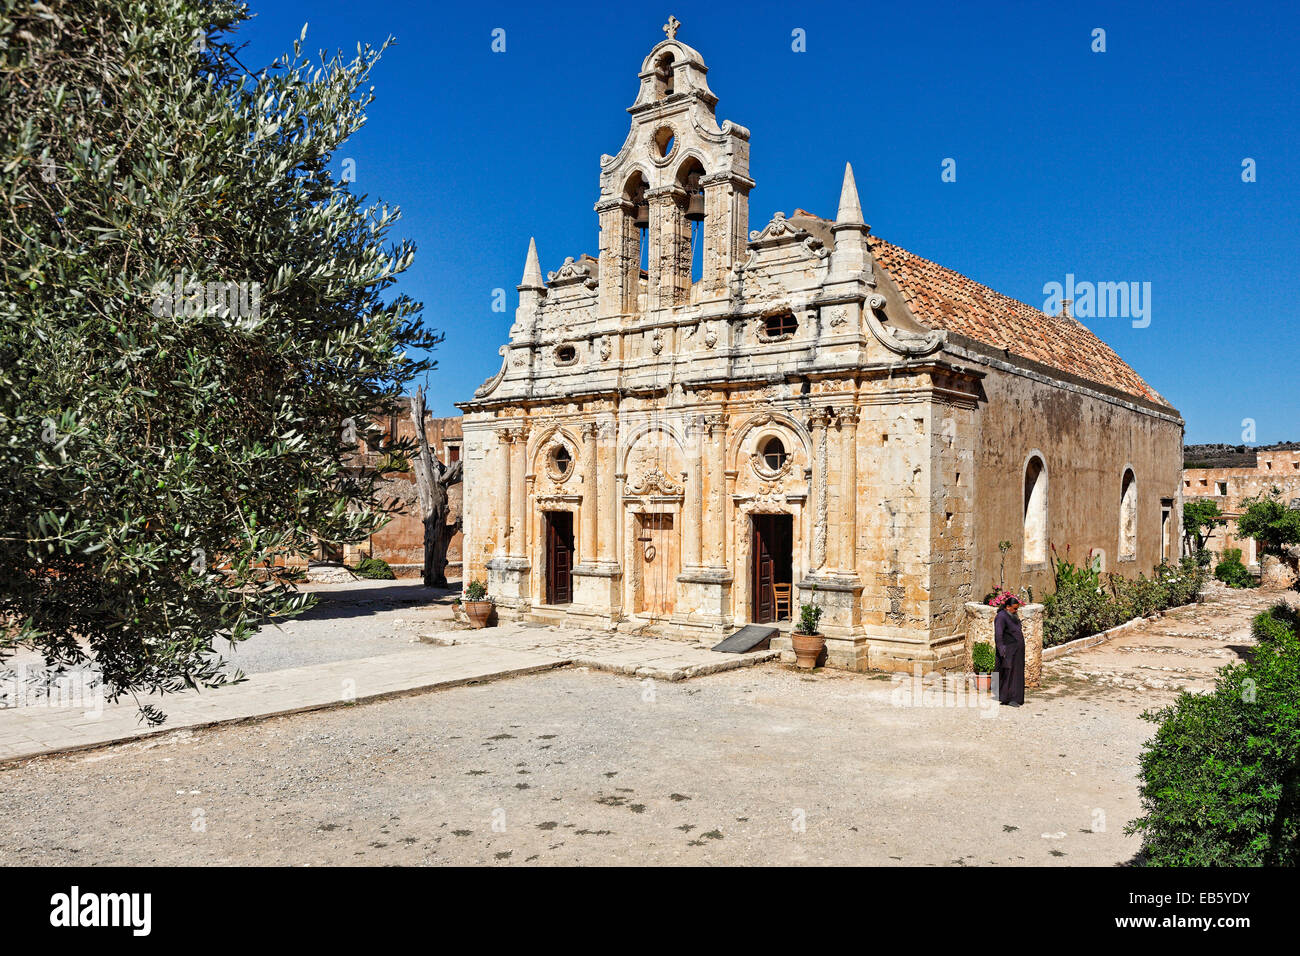 The Arkadi Monastery was built in 1587 on the island of Crete, Greece Stock Photo